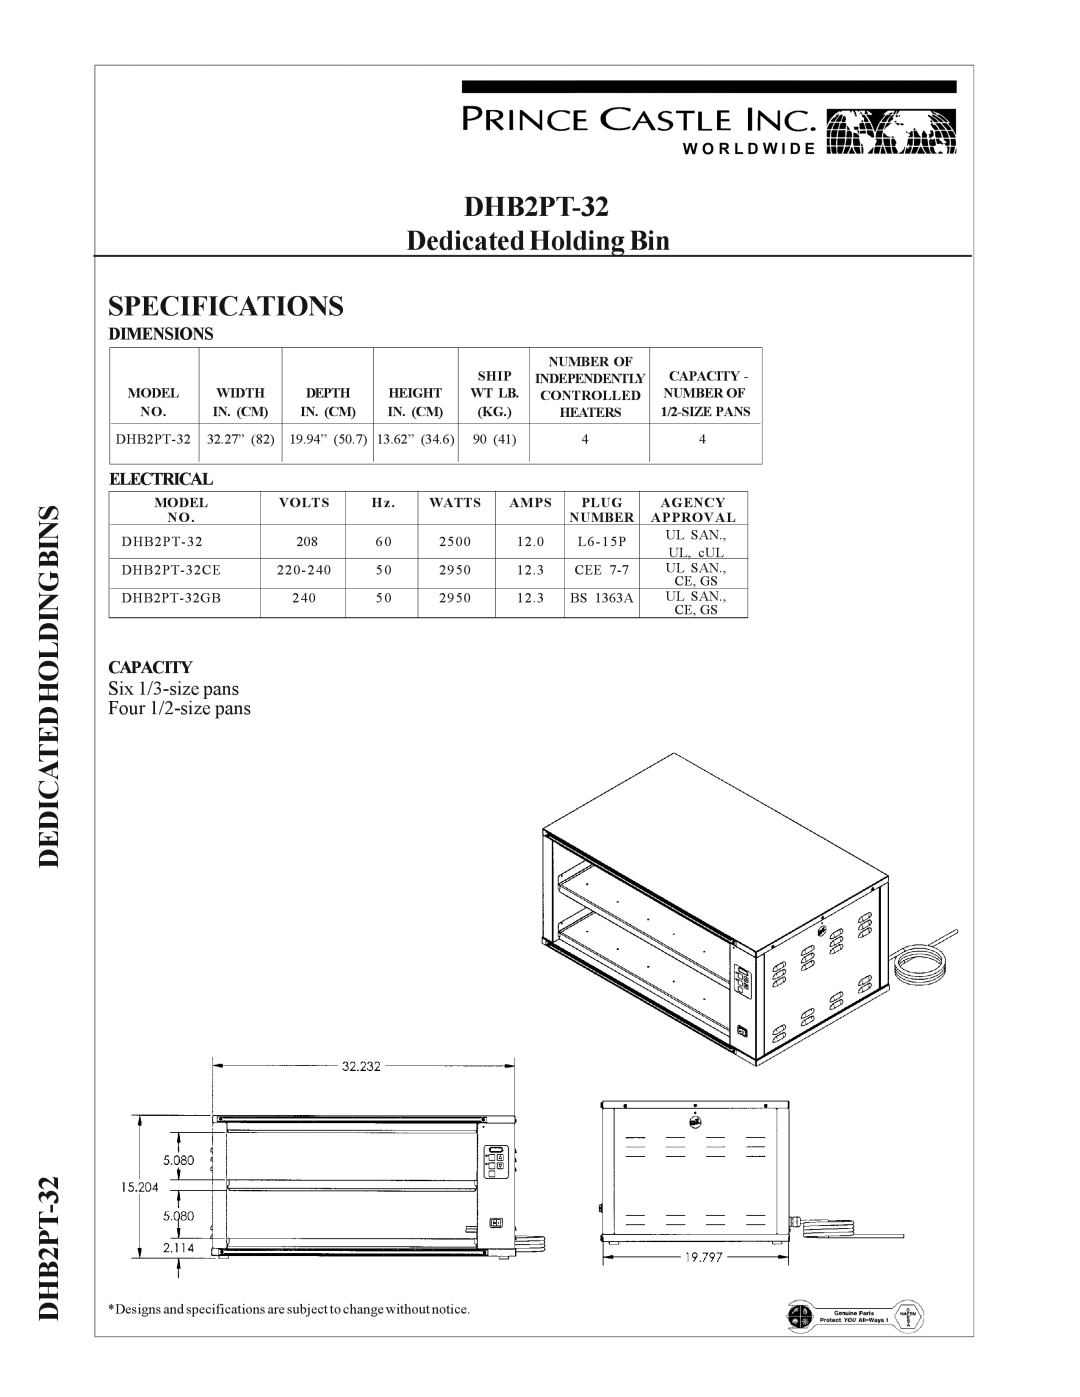 Prince Castle DEDICATEDHOLDINGBINS DHB2PT-32, Specifications, Dedicated Holding Bin, Dimensions, Electrical, Capacity 